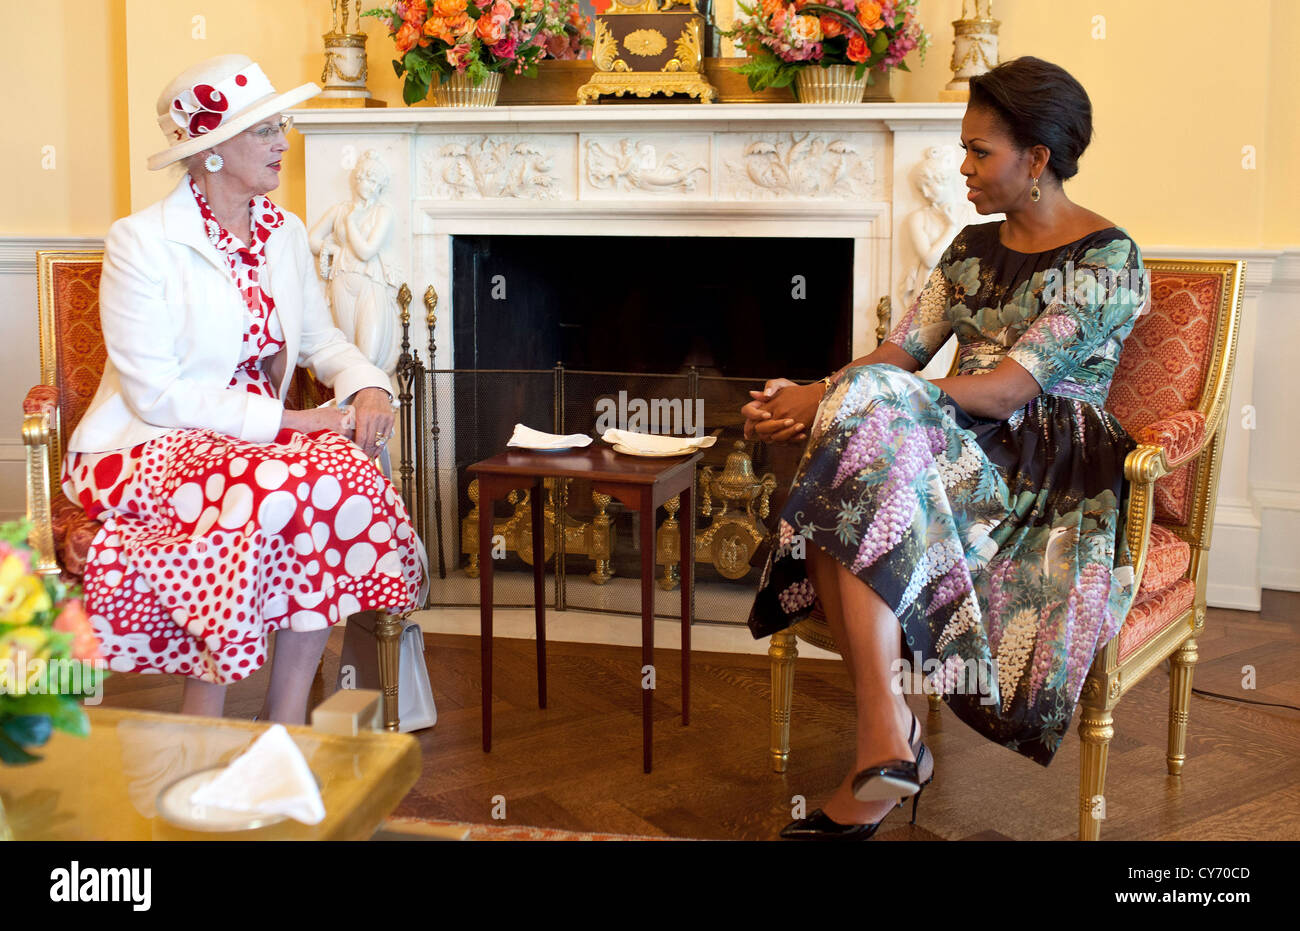 First Lady Michelle Obama has coffee with the Queen of Denmark Margethe II June 8, 2011 in the Yellow Oval Room of the White House Stock Photo